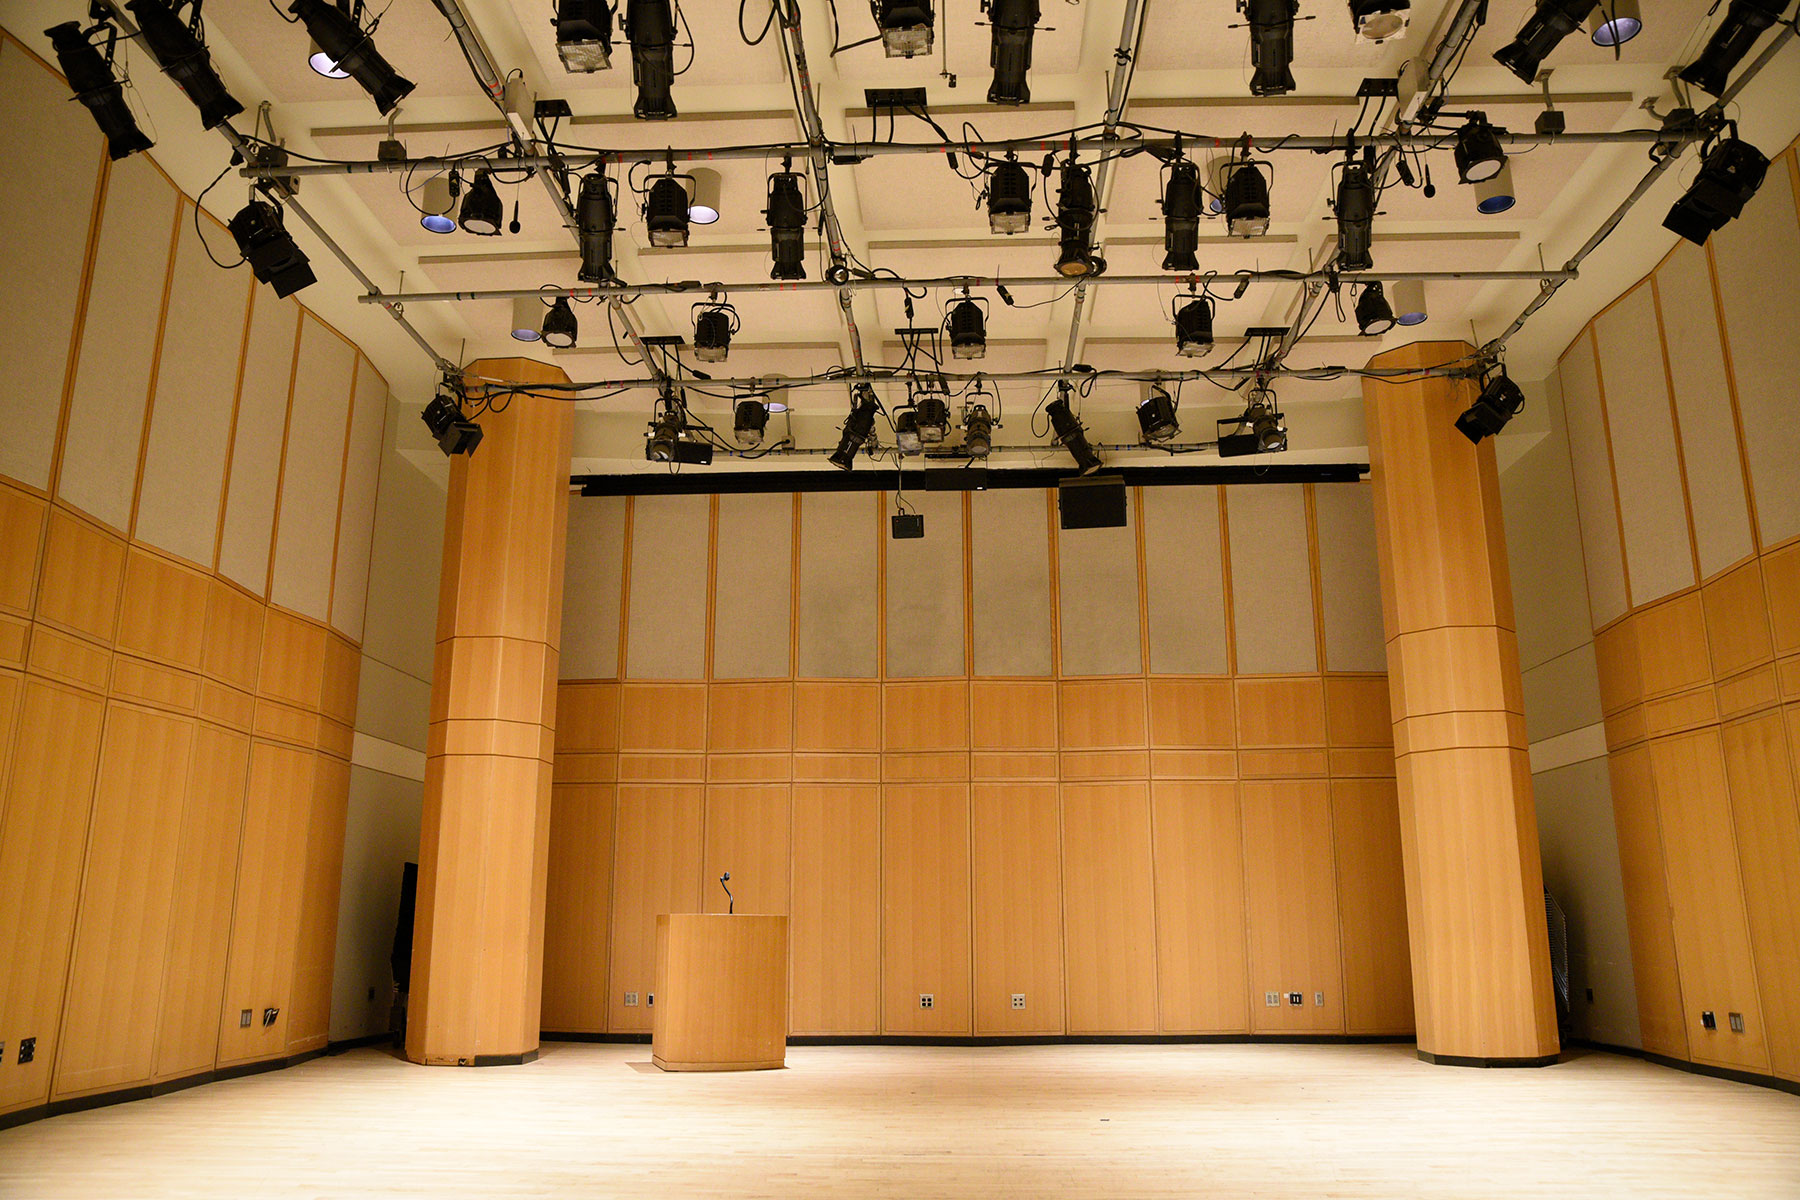 Black Box Theater Rental in NYC - Segal Theatre. Empty space, which can accommodate a variety of events.